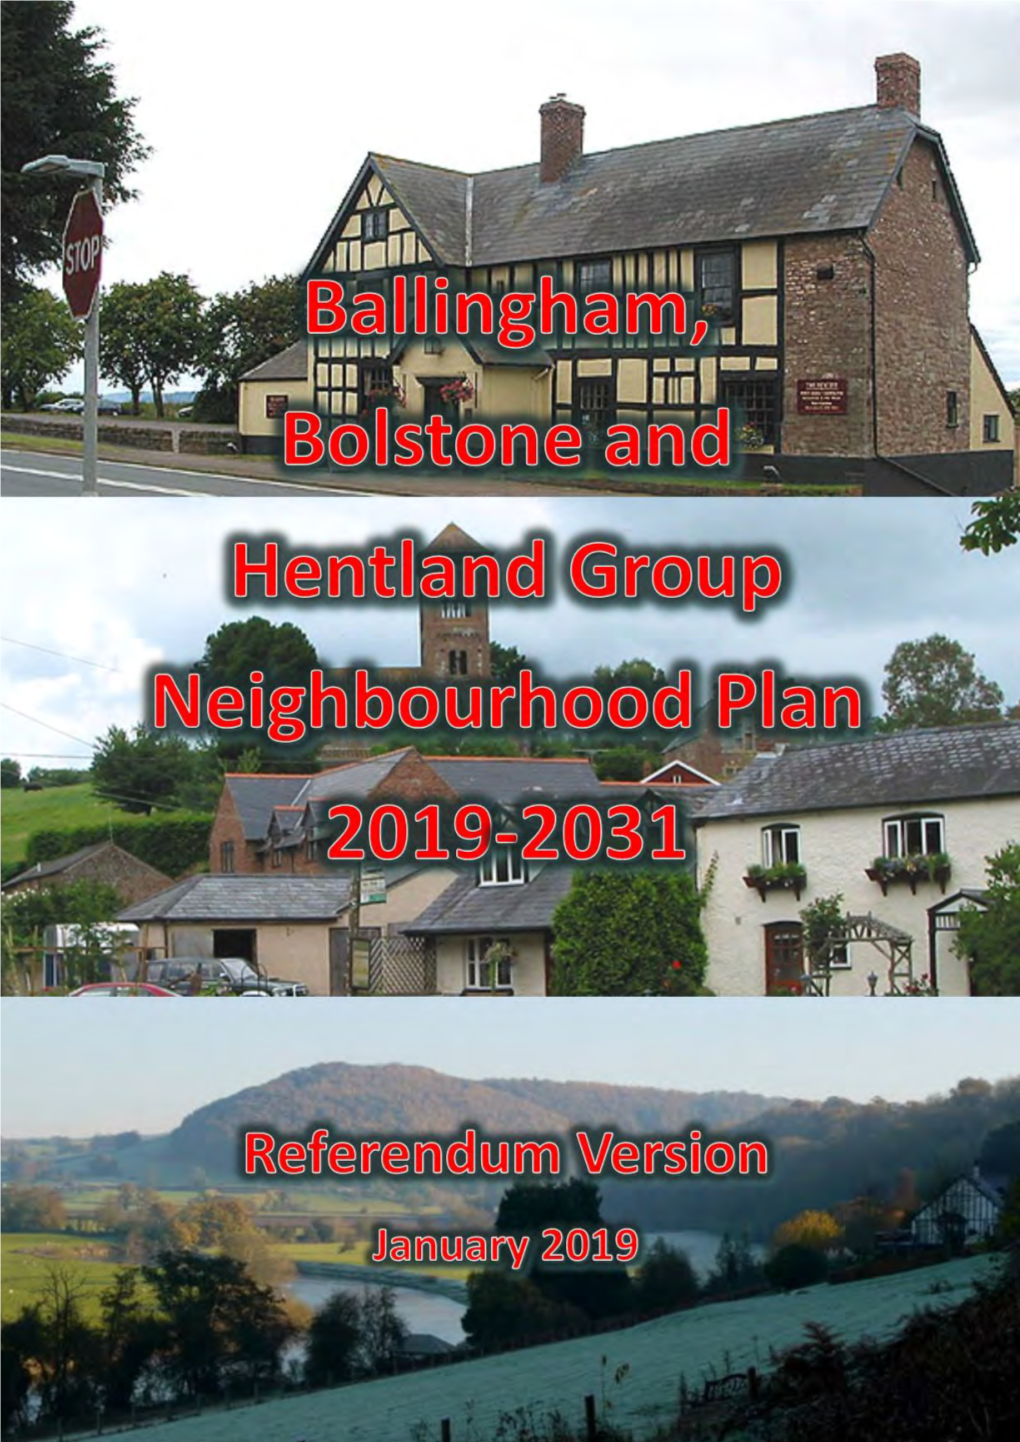 Ballingham, Bolstone and Hentland Group Are Part of the Ross on Wye Rural Housing Market Area (RHMA)